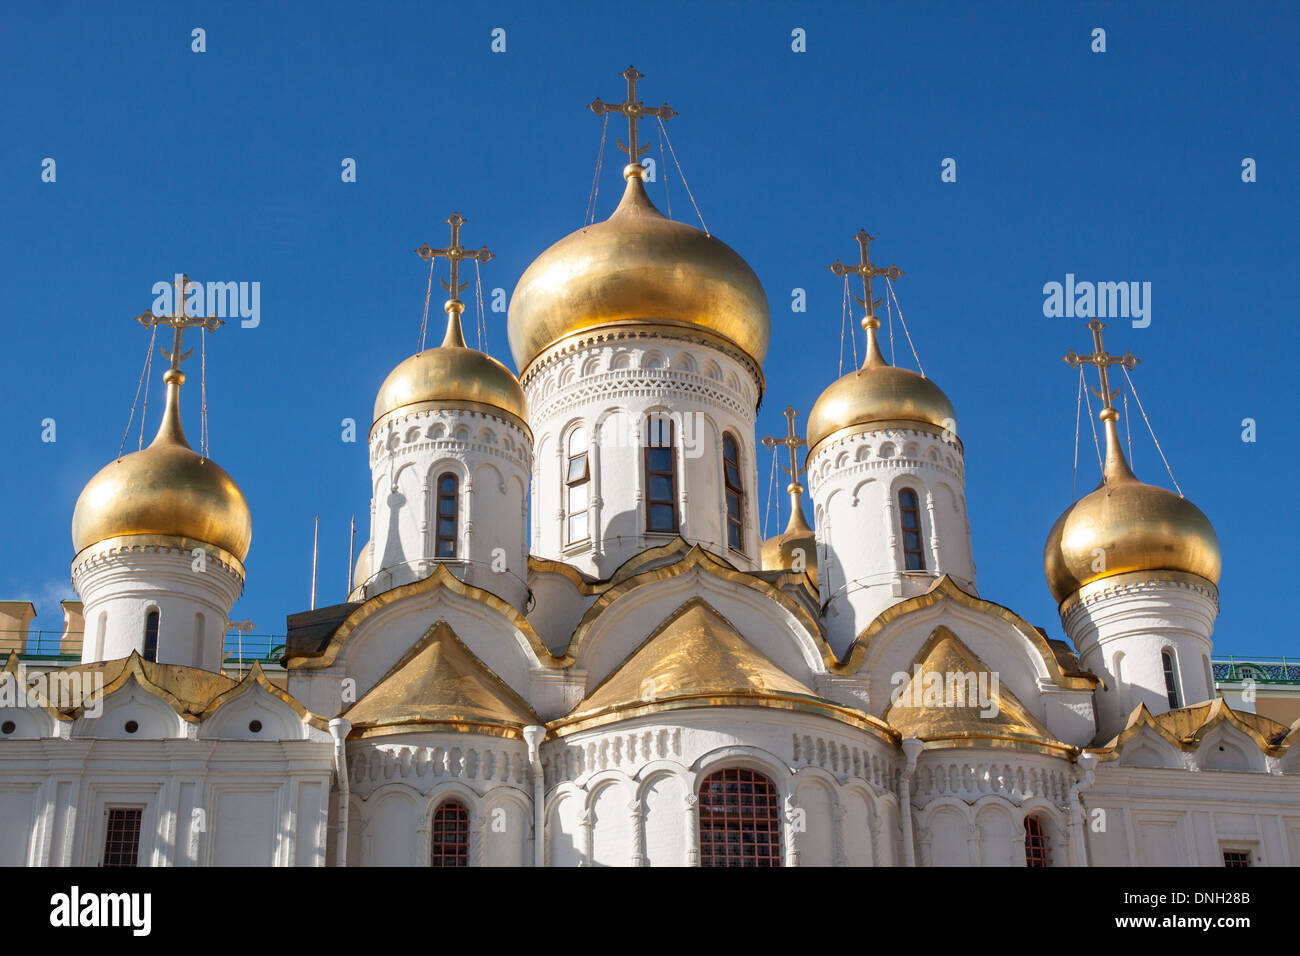 DOMES OF THE CATHEDRAL OF THE ANNUNCIATION, THE IMPERIAL FAMILY'S PRIVATE CHAPEL IN THE TIME OF THE CZARS, ORTHODOX RELIGION, CATHEDRAL SQUARE, KREMLIN, MOSCOW, RUSSIA Stock Photo